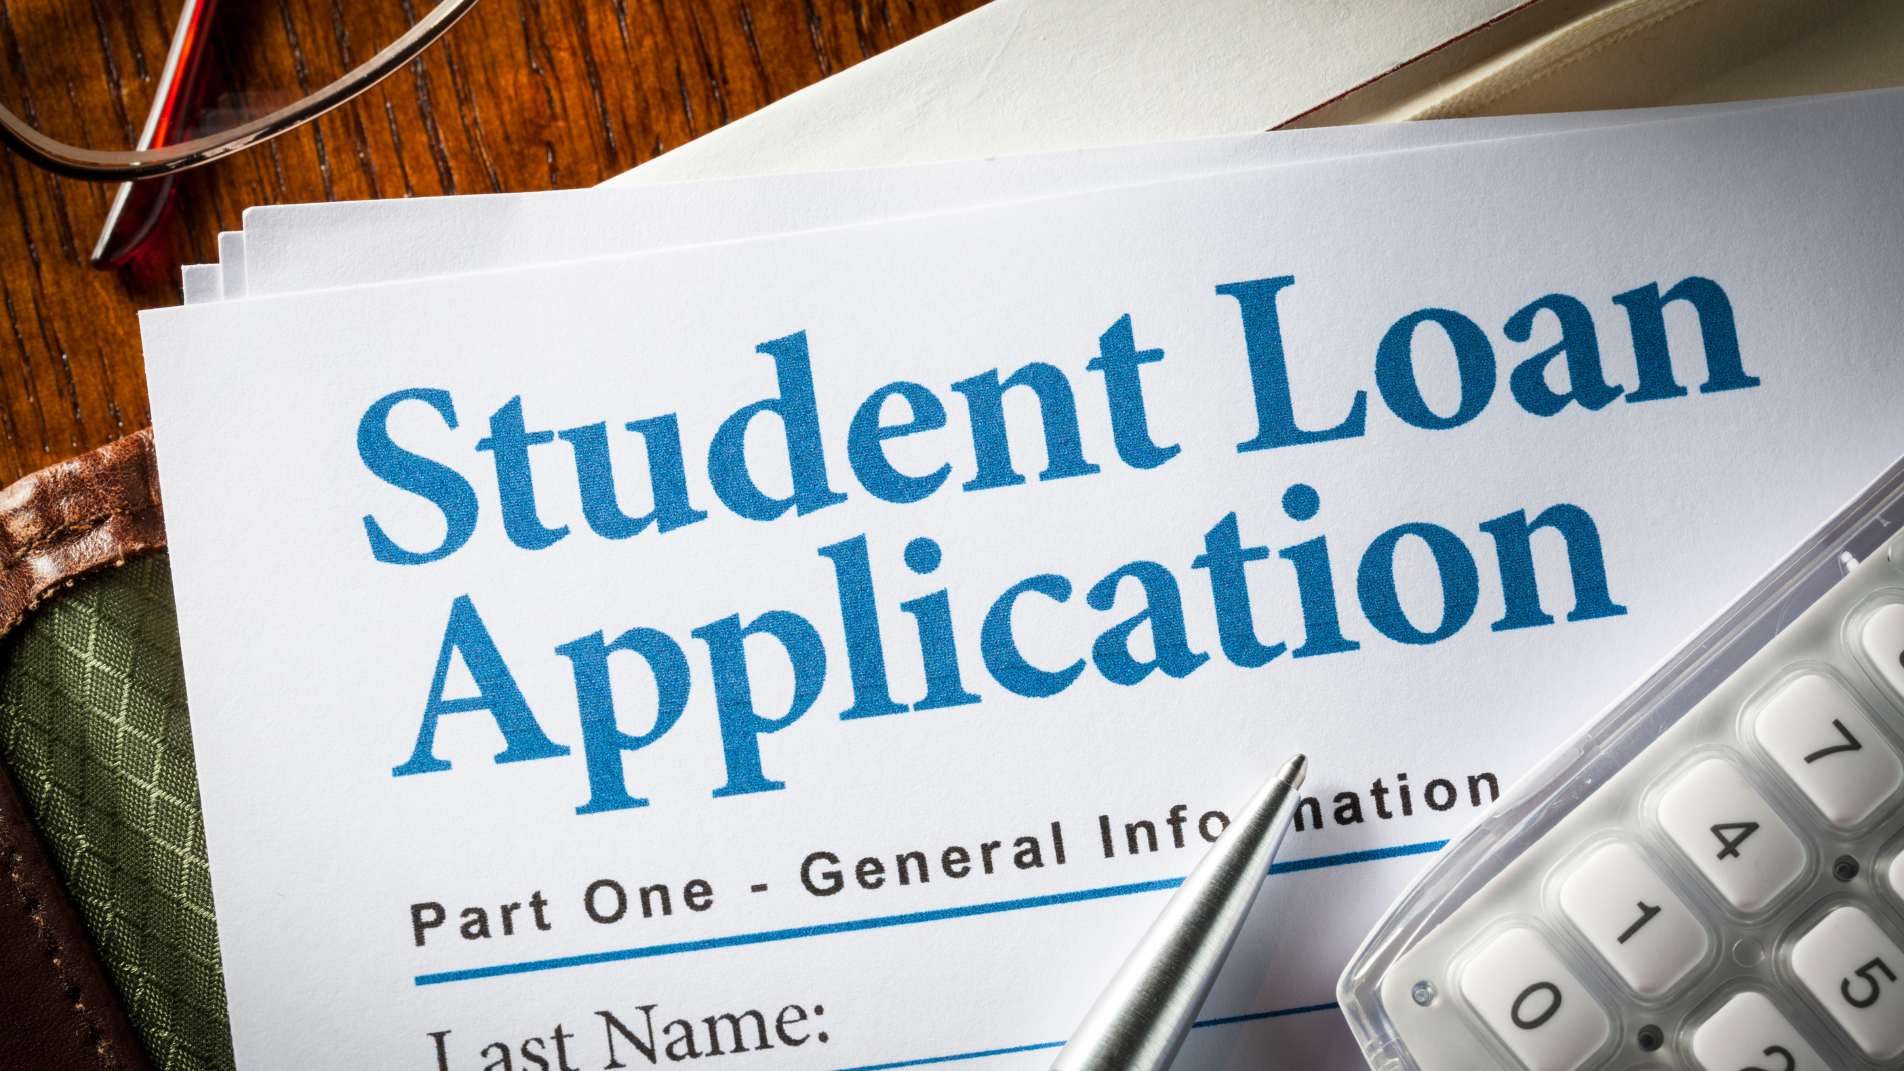 Student Loan Application Portal to Officially Open May 24